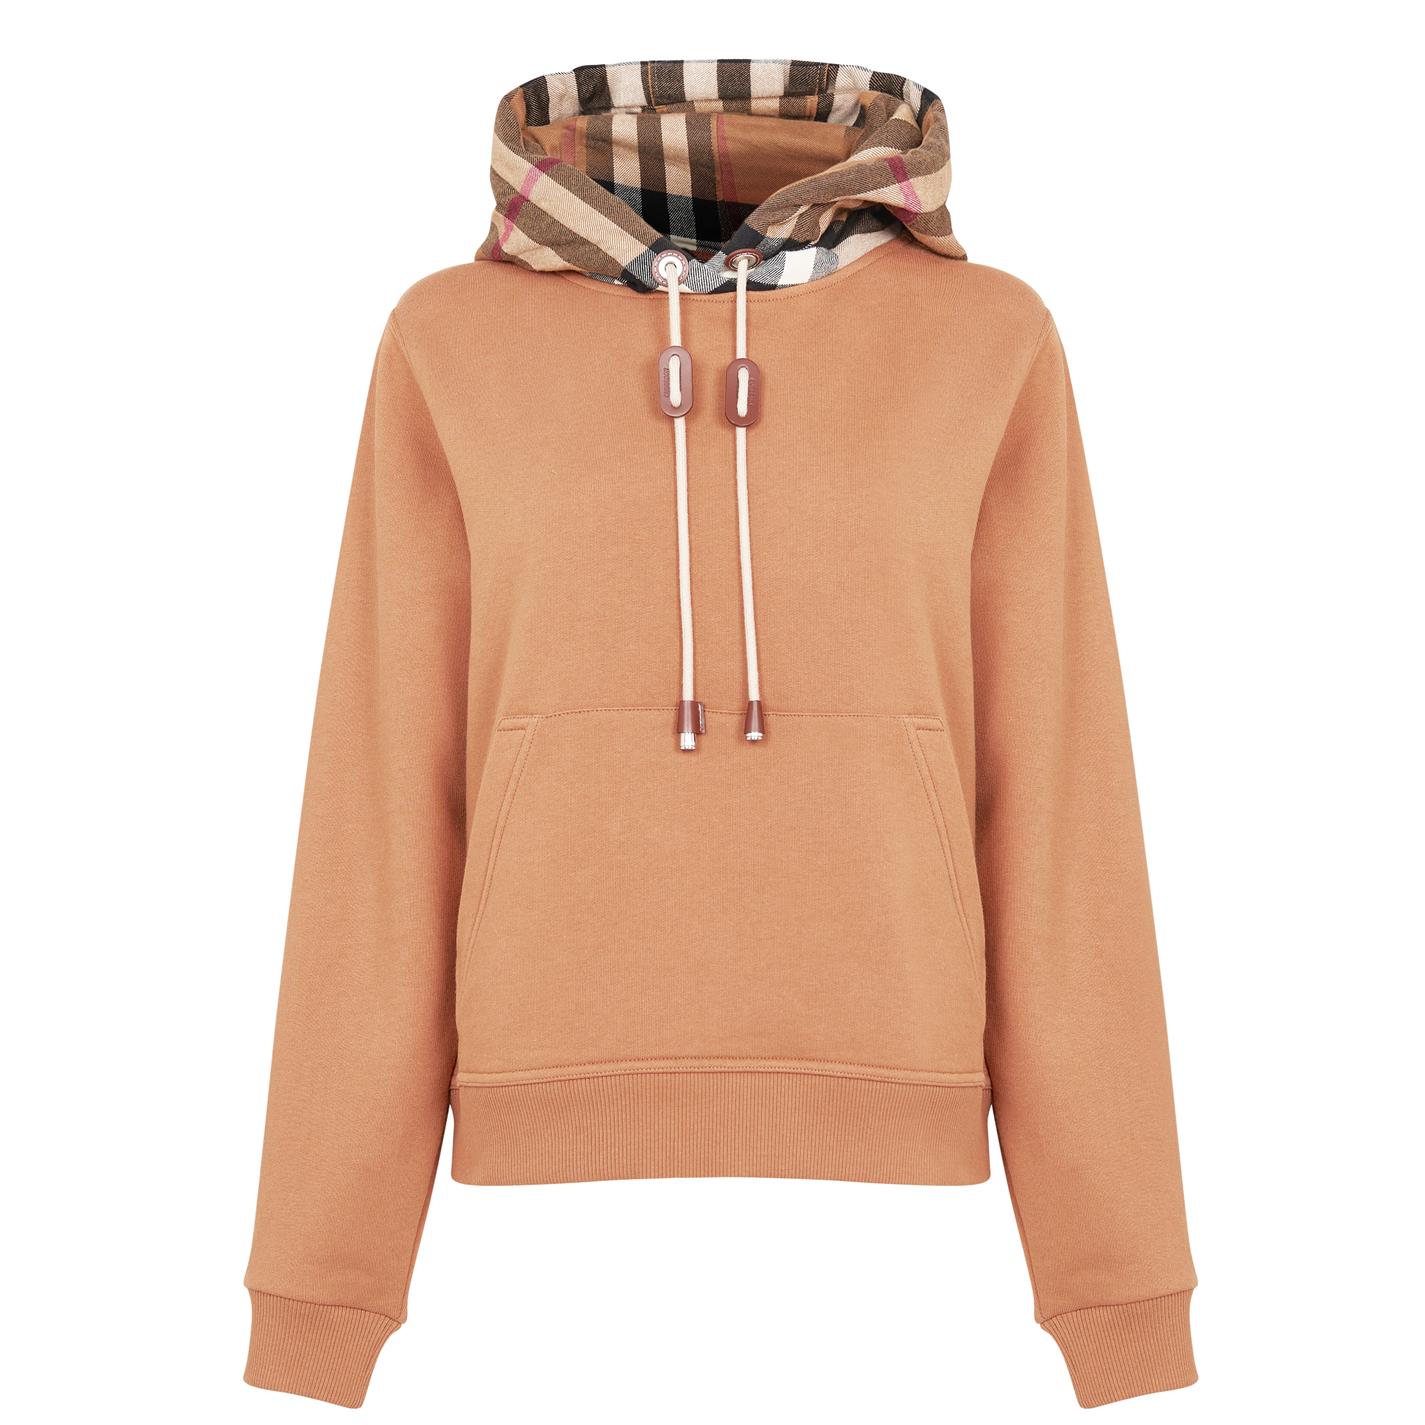 The Elegance of the Burberry Hoodie